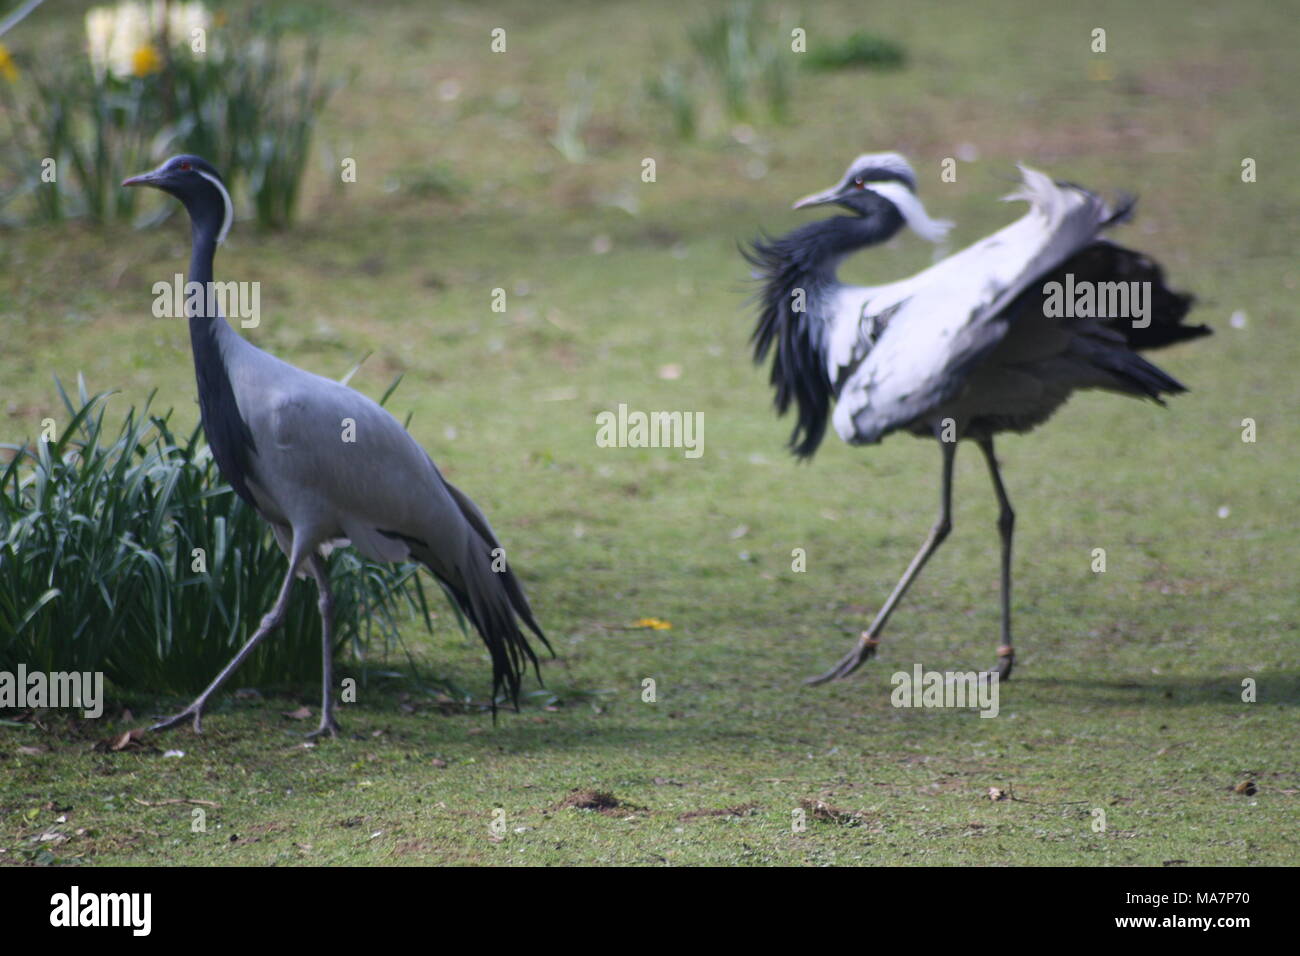 A pair of Demoiselle cranes walking in some gardens. Stock Photo